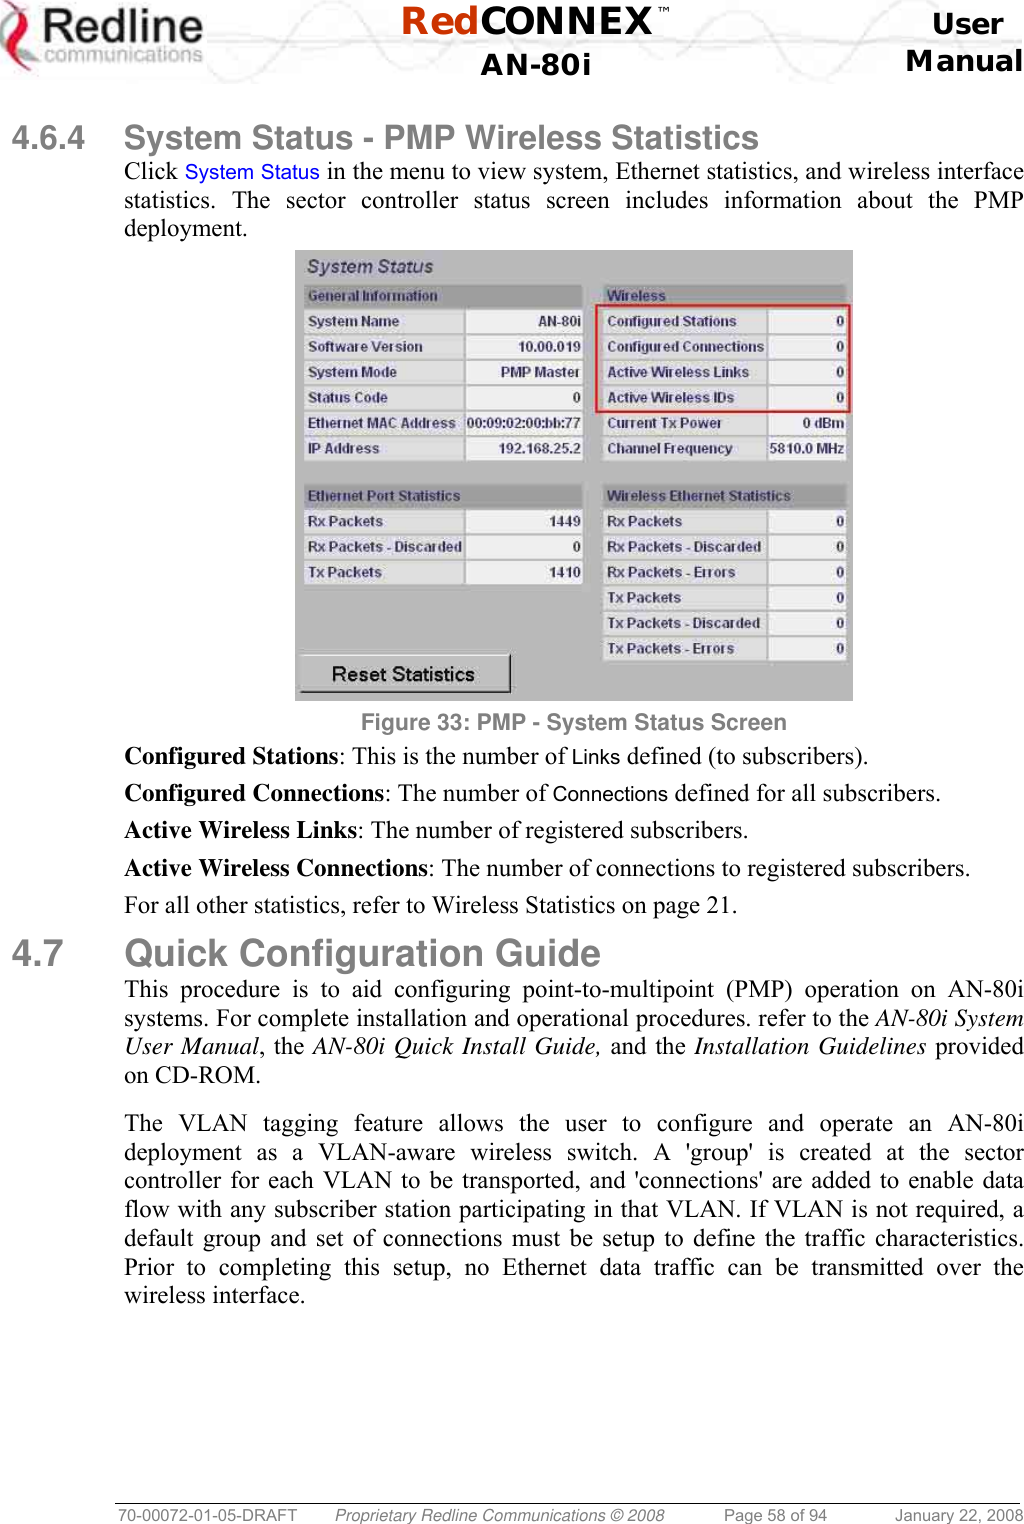  RedCONNEX™    User  AN-80i Manual  70-00072-01-05-DRAFT  Proprietary Redline Communications © 2008  Page 58 of 94  January 22, 2008  4.6.4  System Status - PMP Wireless Statistics Click System Status in the menu to view system, Ethernet statistics, and wireless interface statistics. The sector controller status screen includes information about the PMP deployment.  Figure 33: PMP - System Status Screen Configured Stations: This is the number of Links defined (to subscribers). Configured Connections: The number of Connections defined for all subscribers. Active Wireless Links: The number of registered subscribers. Active Wireless Connections: The number of connections to registered subscribers. For all other statistics, refer to Wireless Statistics on page 21.  4.7 Quick Configuration Guide This procedure is to aid configuring point-to-multipoint (PMP) operation on AN-80i systems. For complete installation and operational procedures. refer to the AN-80i System User Manual, the AN-80i Quick Install Guide, and the Installation Guidelines provided on CD-ROM.  The VLAN tagging feature allows the user to configure and operate an AN-80i deployment as a VLAN-aware wireless switch. A &apos;group&apos; is created at the sector controller for each VLAN to be transported, and &apos;connections&apos; are added to enable data flow with any subscriber station participating in that VLAN. If VLAN is not required, a default group and set of connections must be setup to define the traffic characteristics. Prior to completing this setup, no Ethernet data traffic can be transmitted over the wireless interface.  